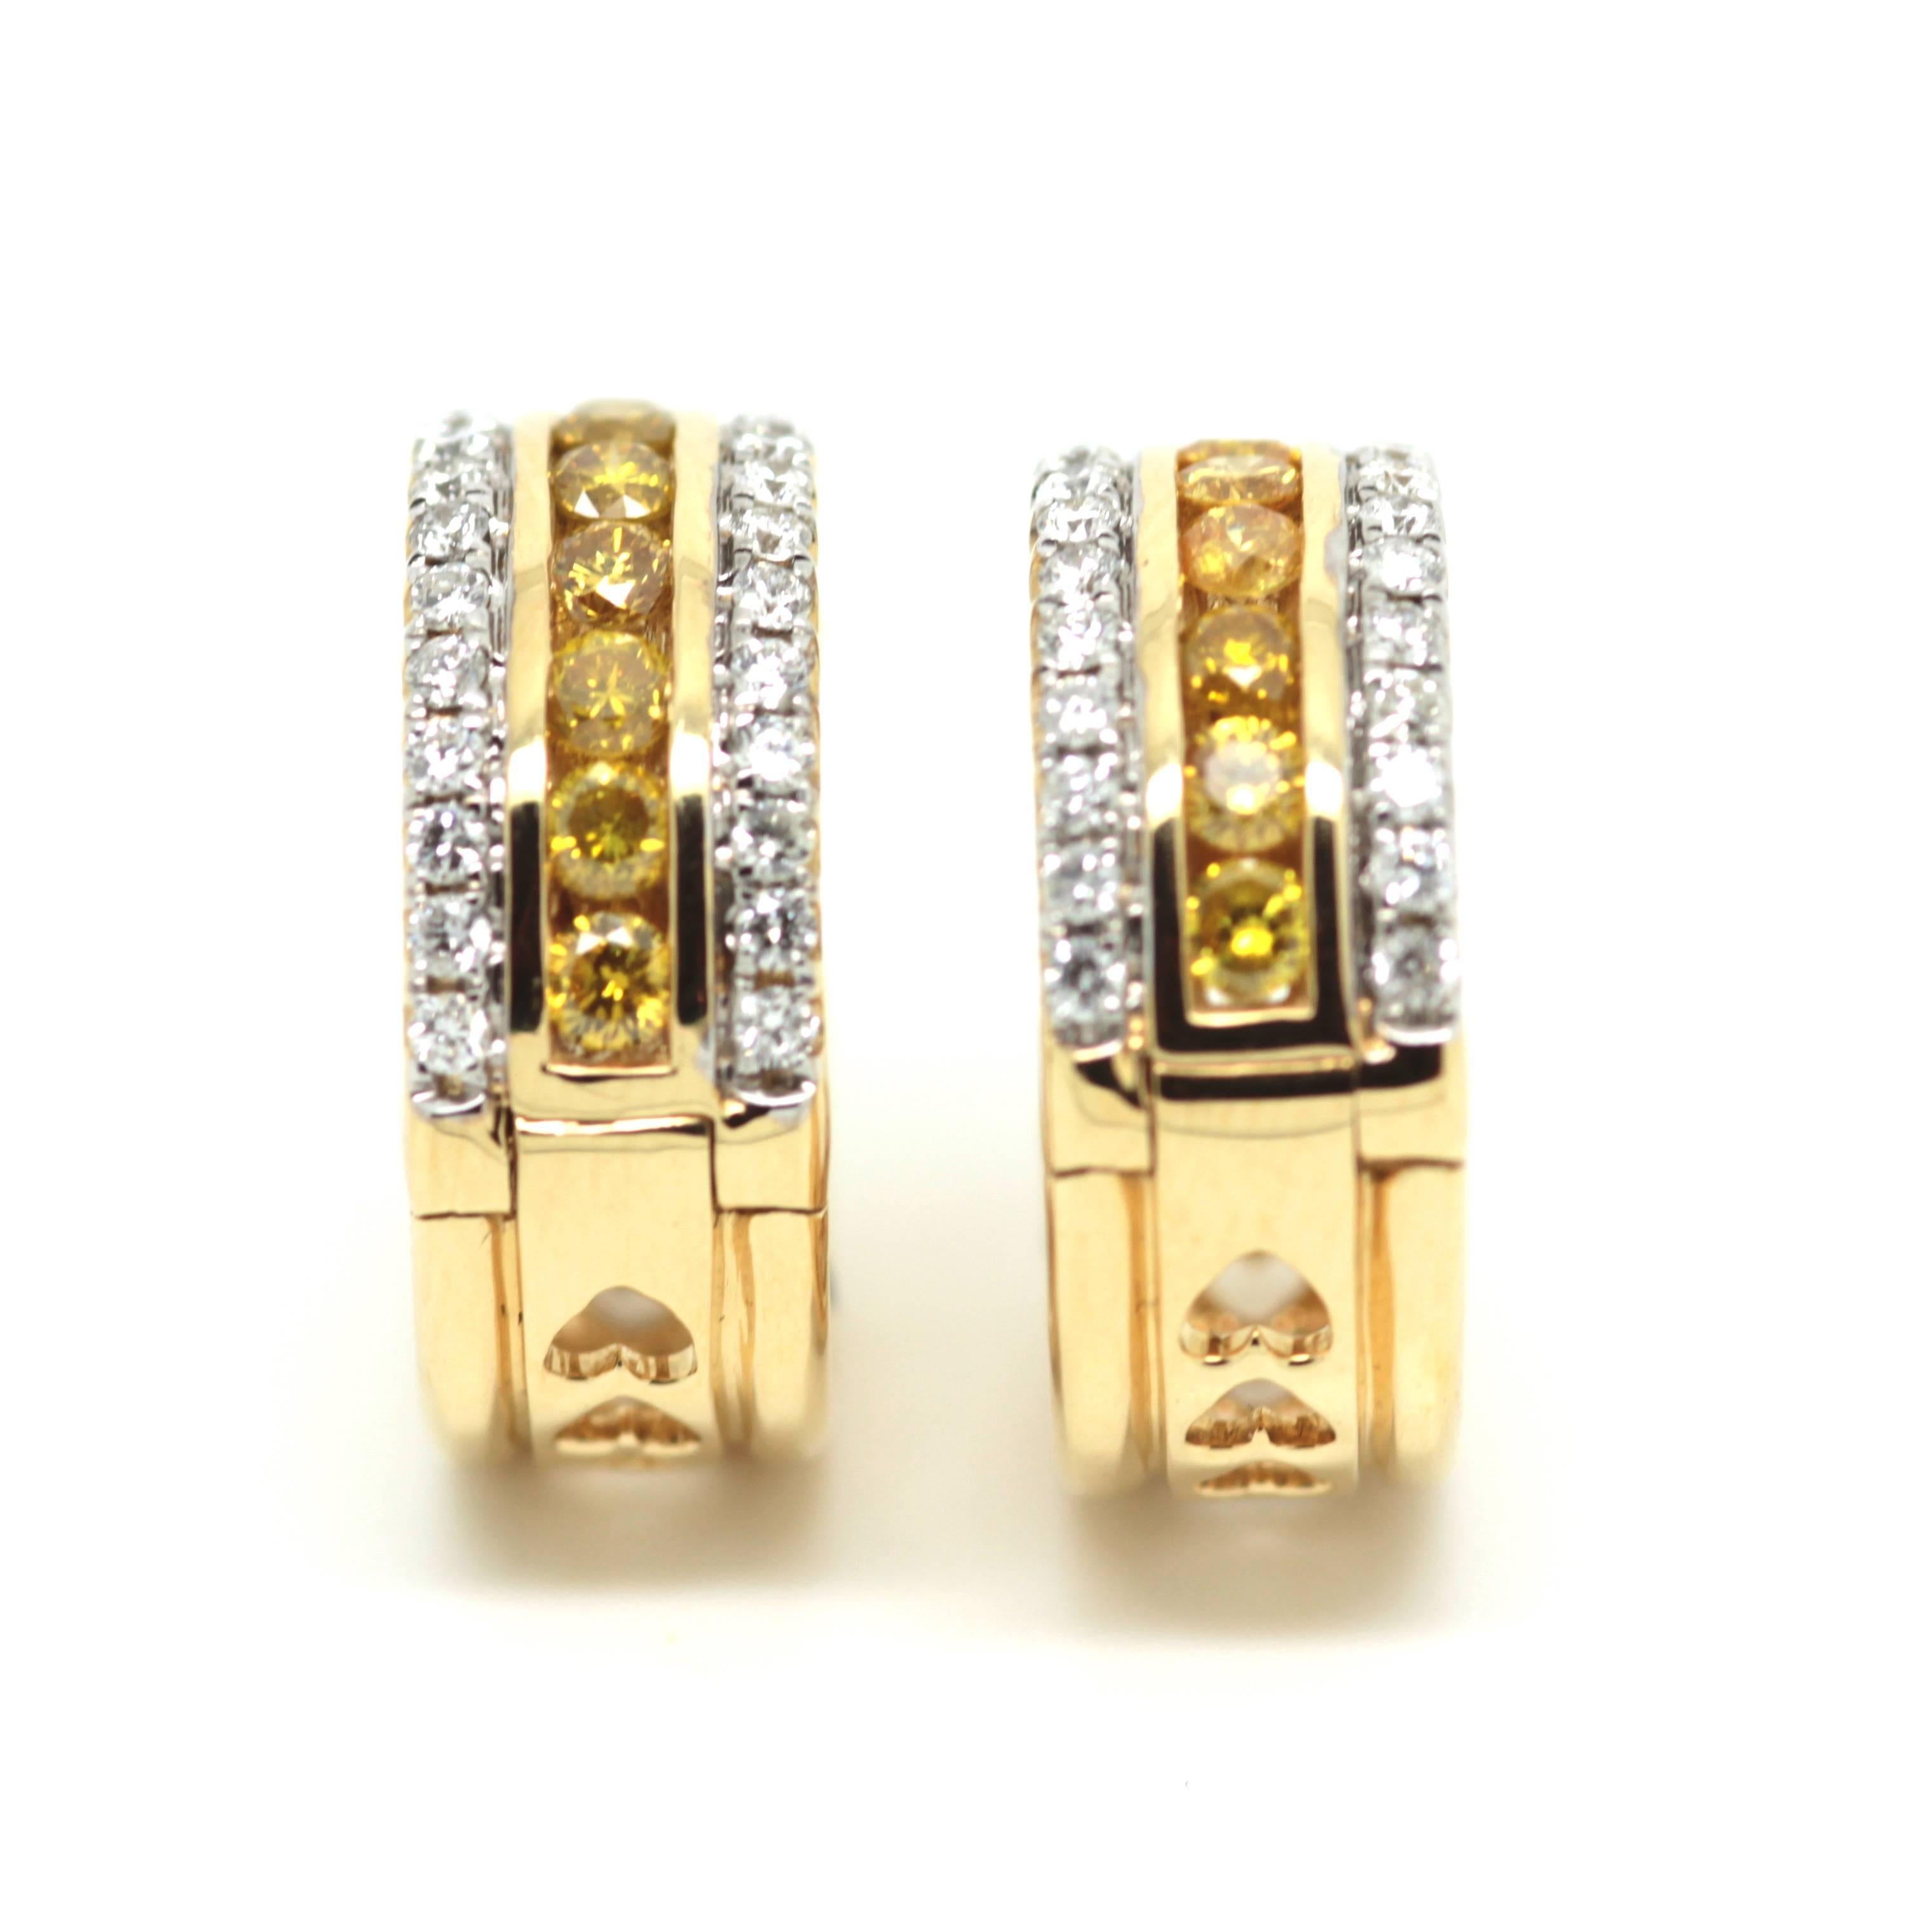 Circular 1.62 Carat Fancy Yellow and White Diamond Earrings In New Condition For Sale In London, GB